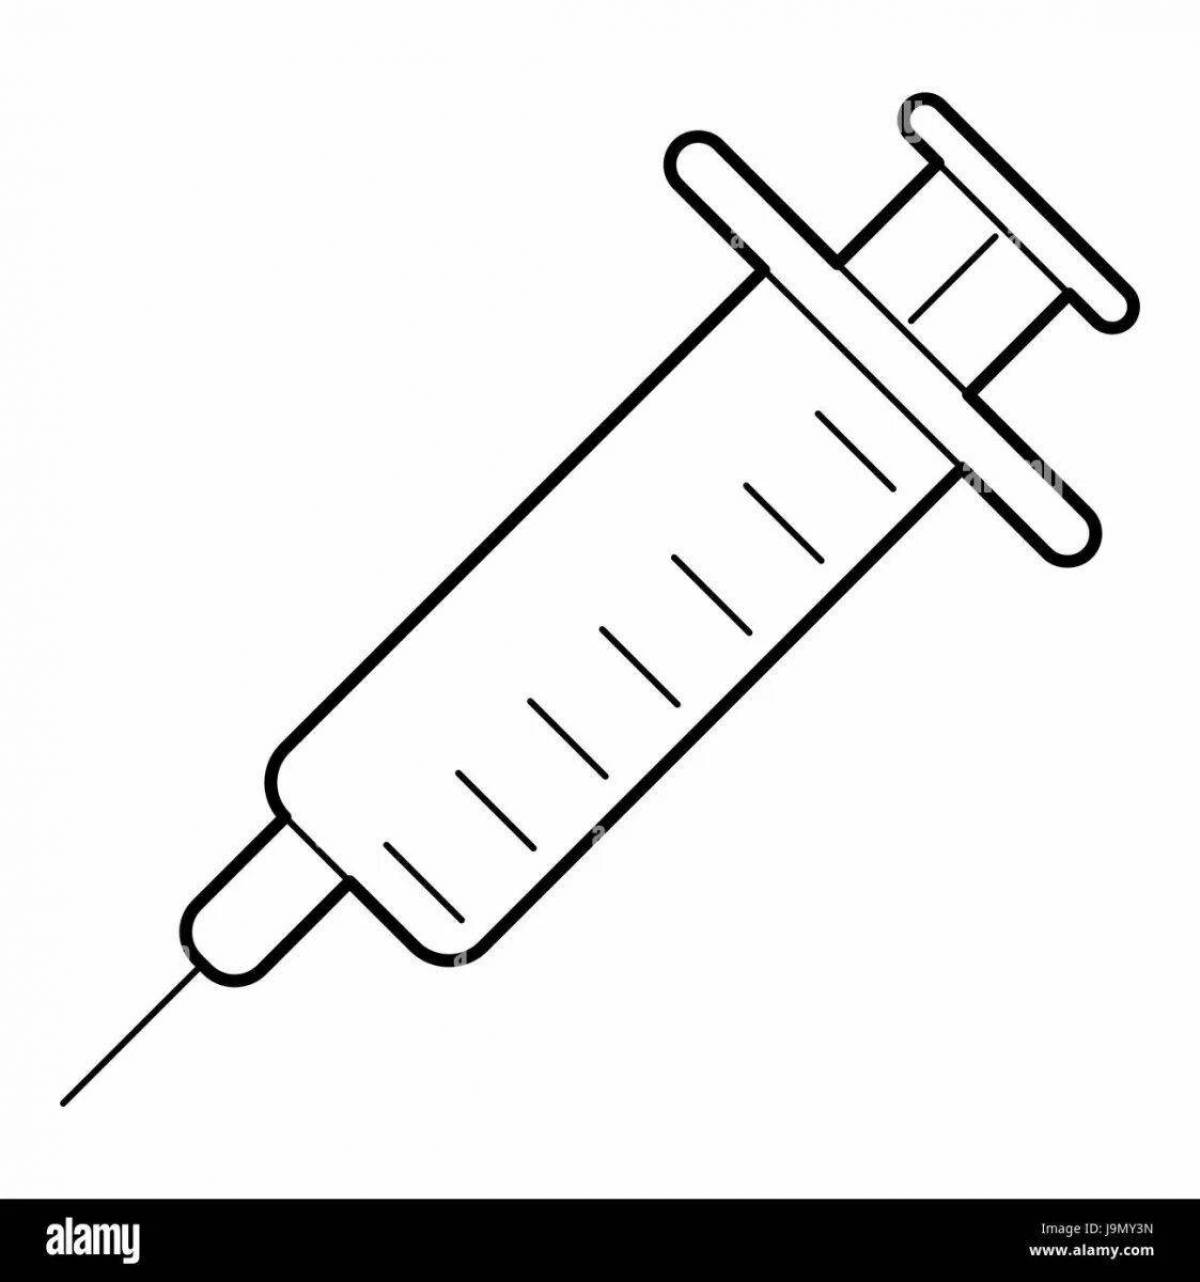 Coloring page witty syringe with needle